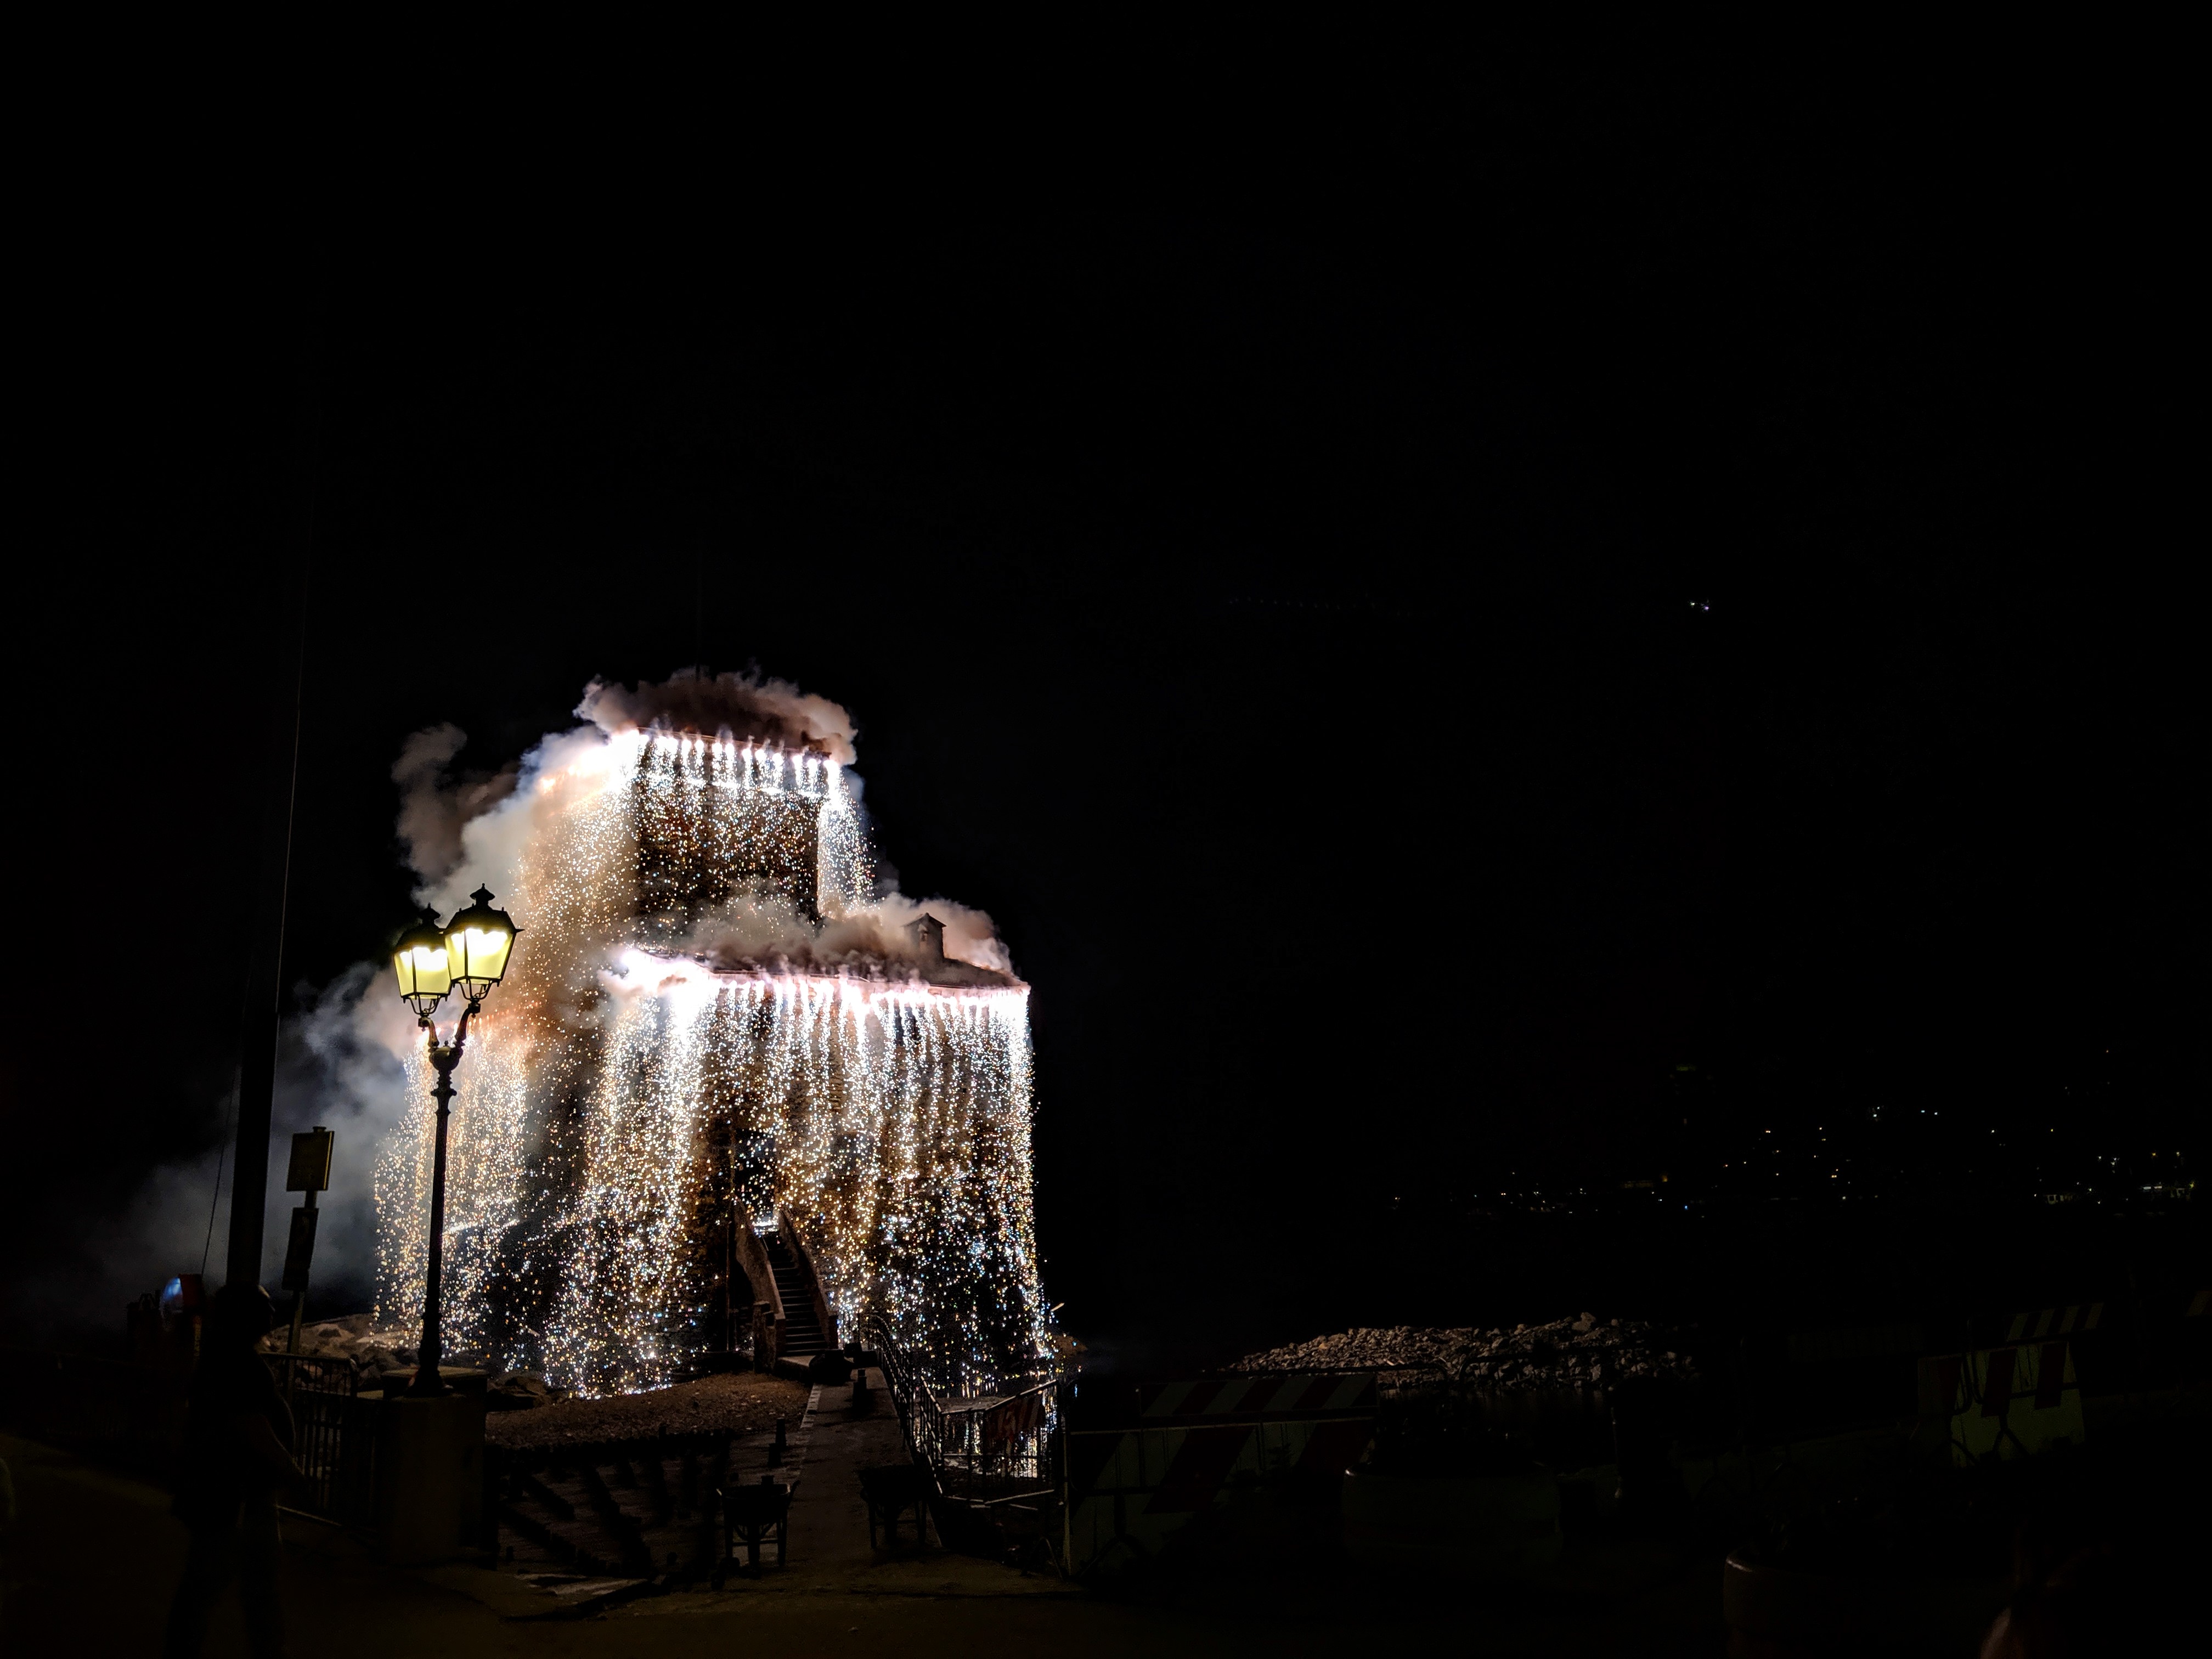 Rapallo's old fortress with flames dripping down from it.